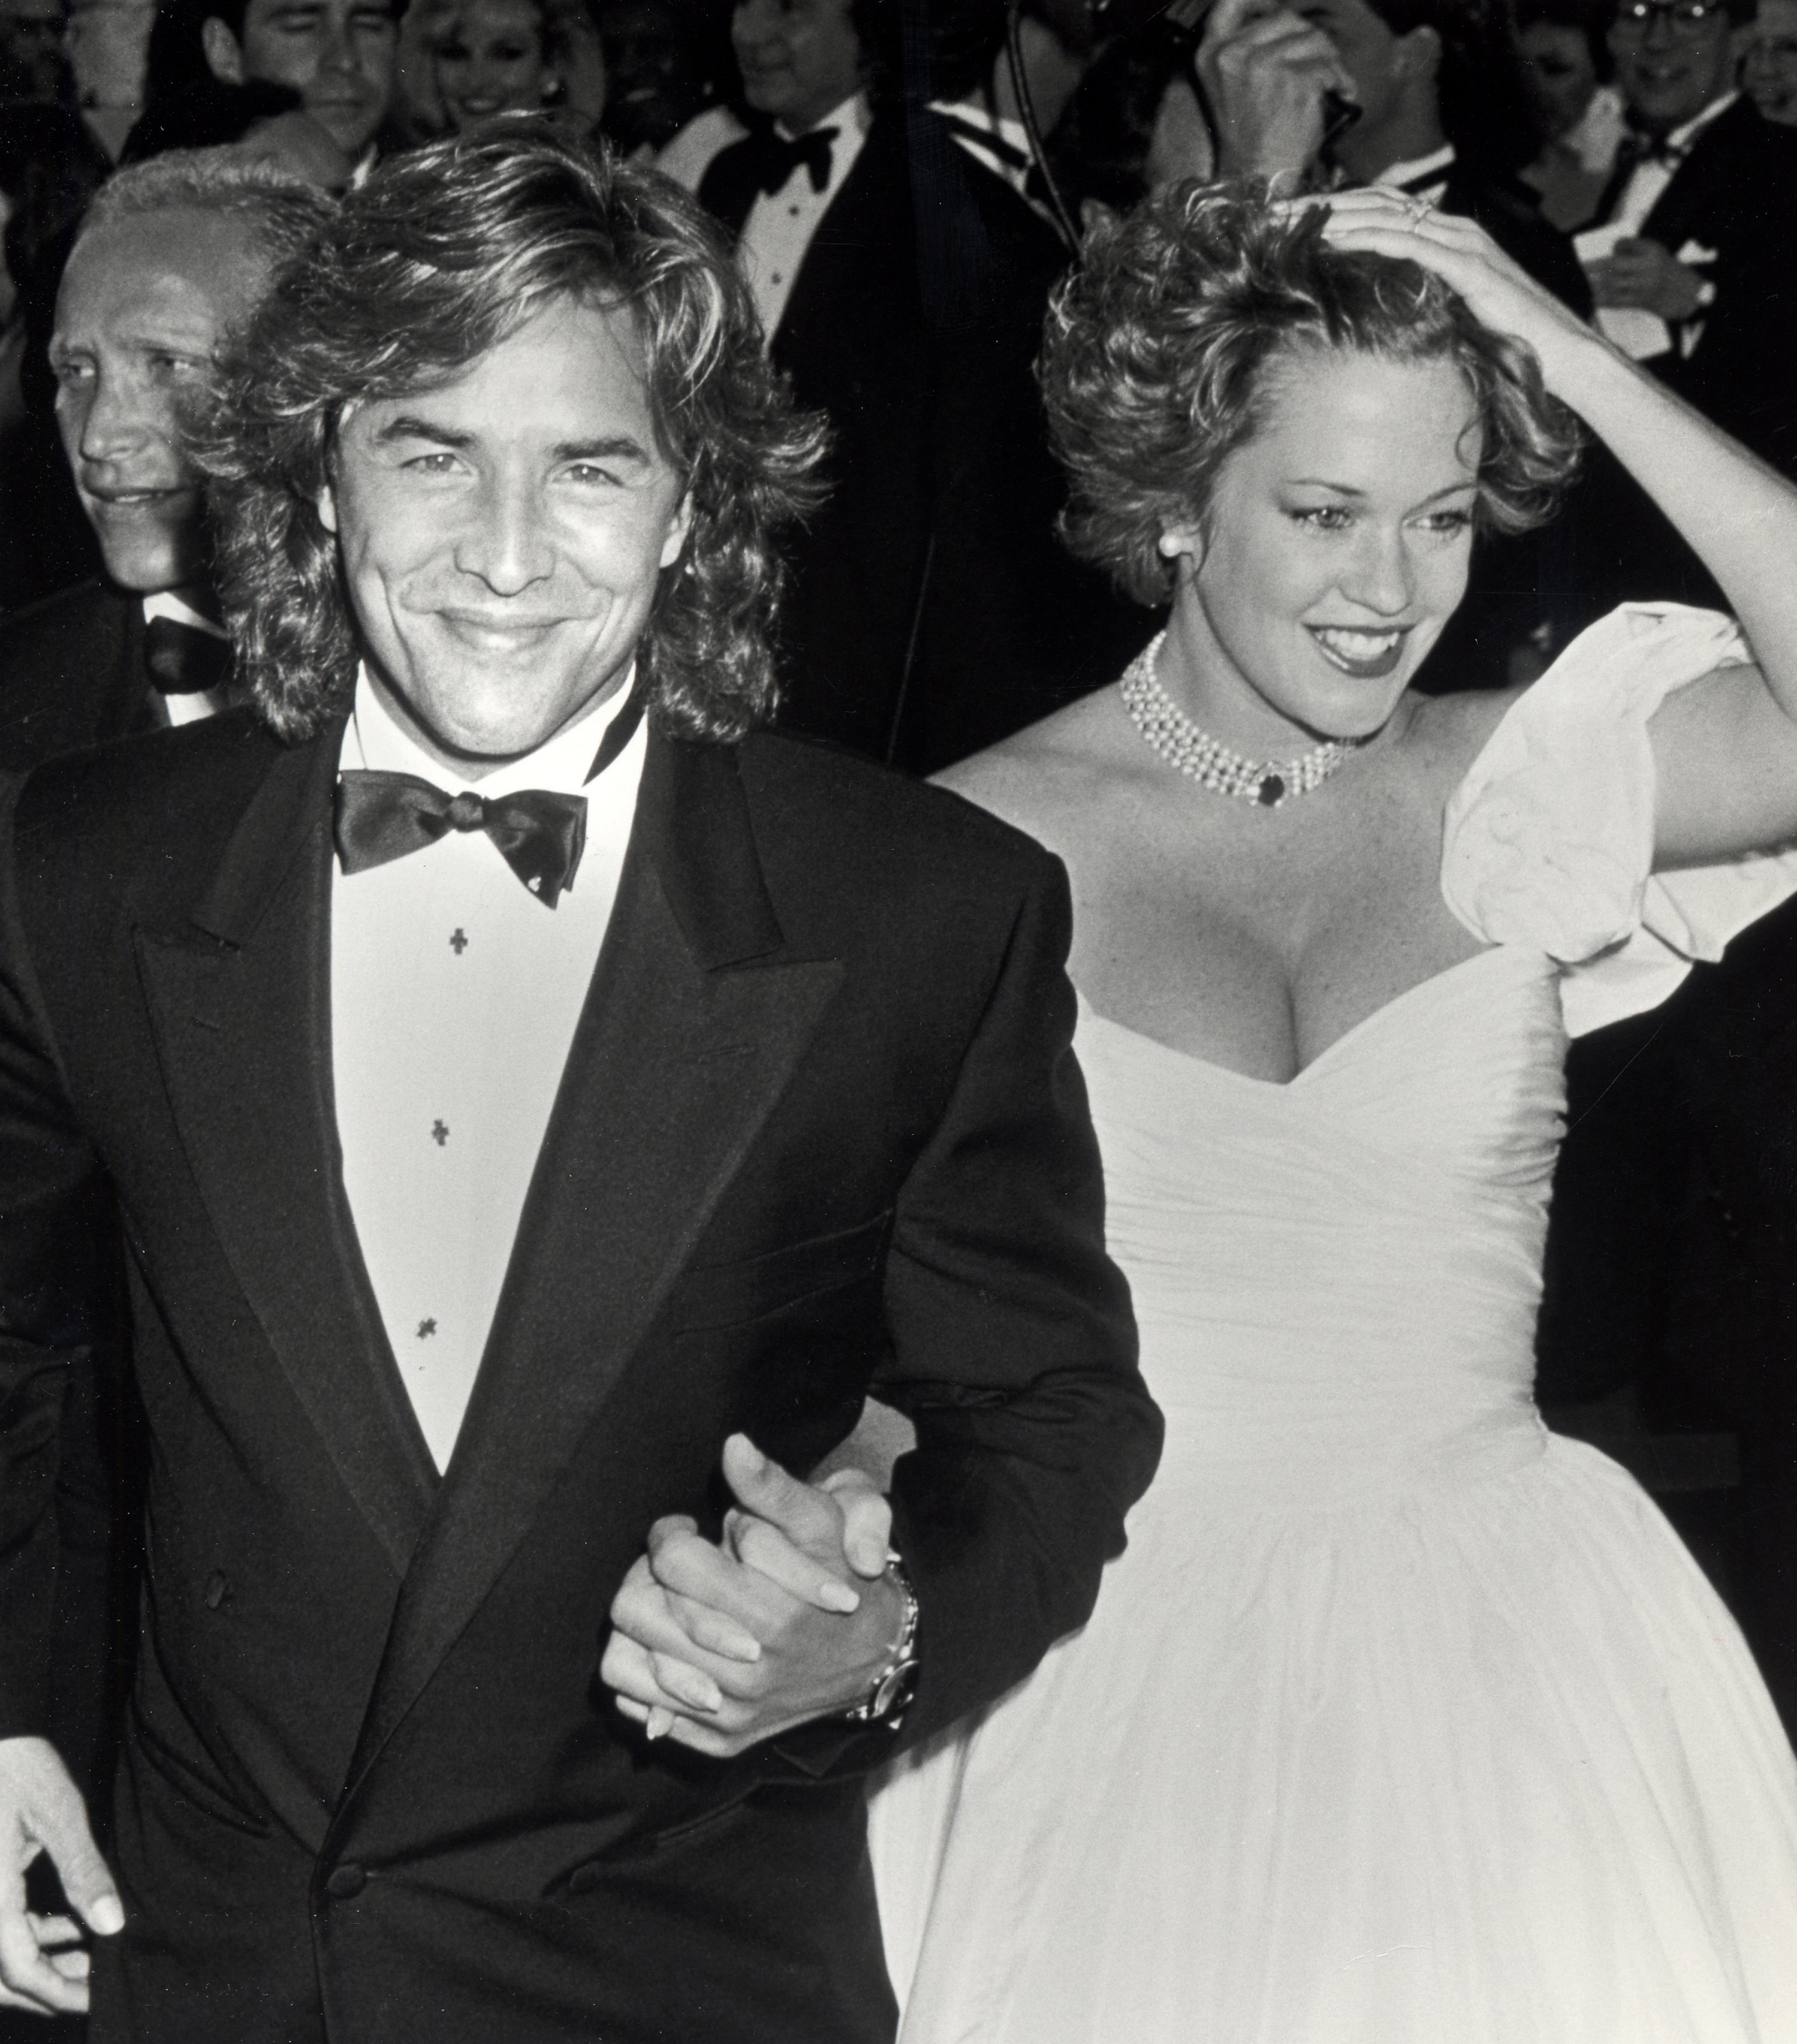 Don Johnson and Melanie Griffith during the 61st Annual Academy Awards - Arrivals in Los Angeles, California on March 29, 1989 | Source: Getty Images